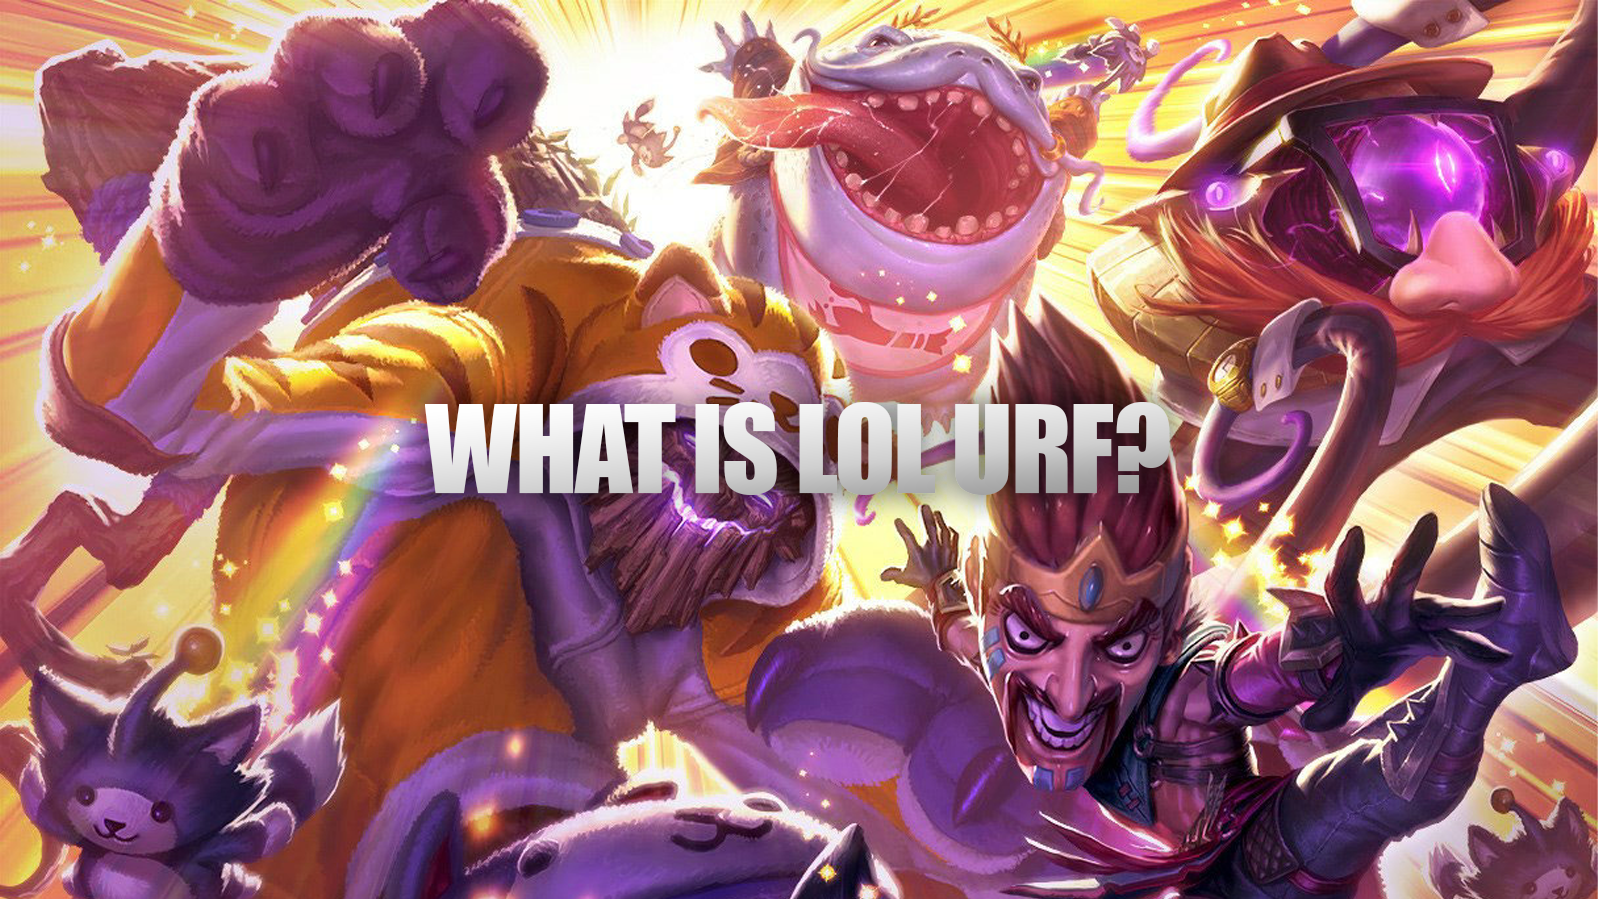 LoL URF is one of the game modes that has become a fan favorite over the years. URF is played on the classic Summoner's Rift map but with some major tweaks to the rules. All champions receive a permanent 